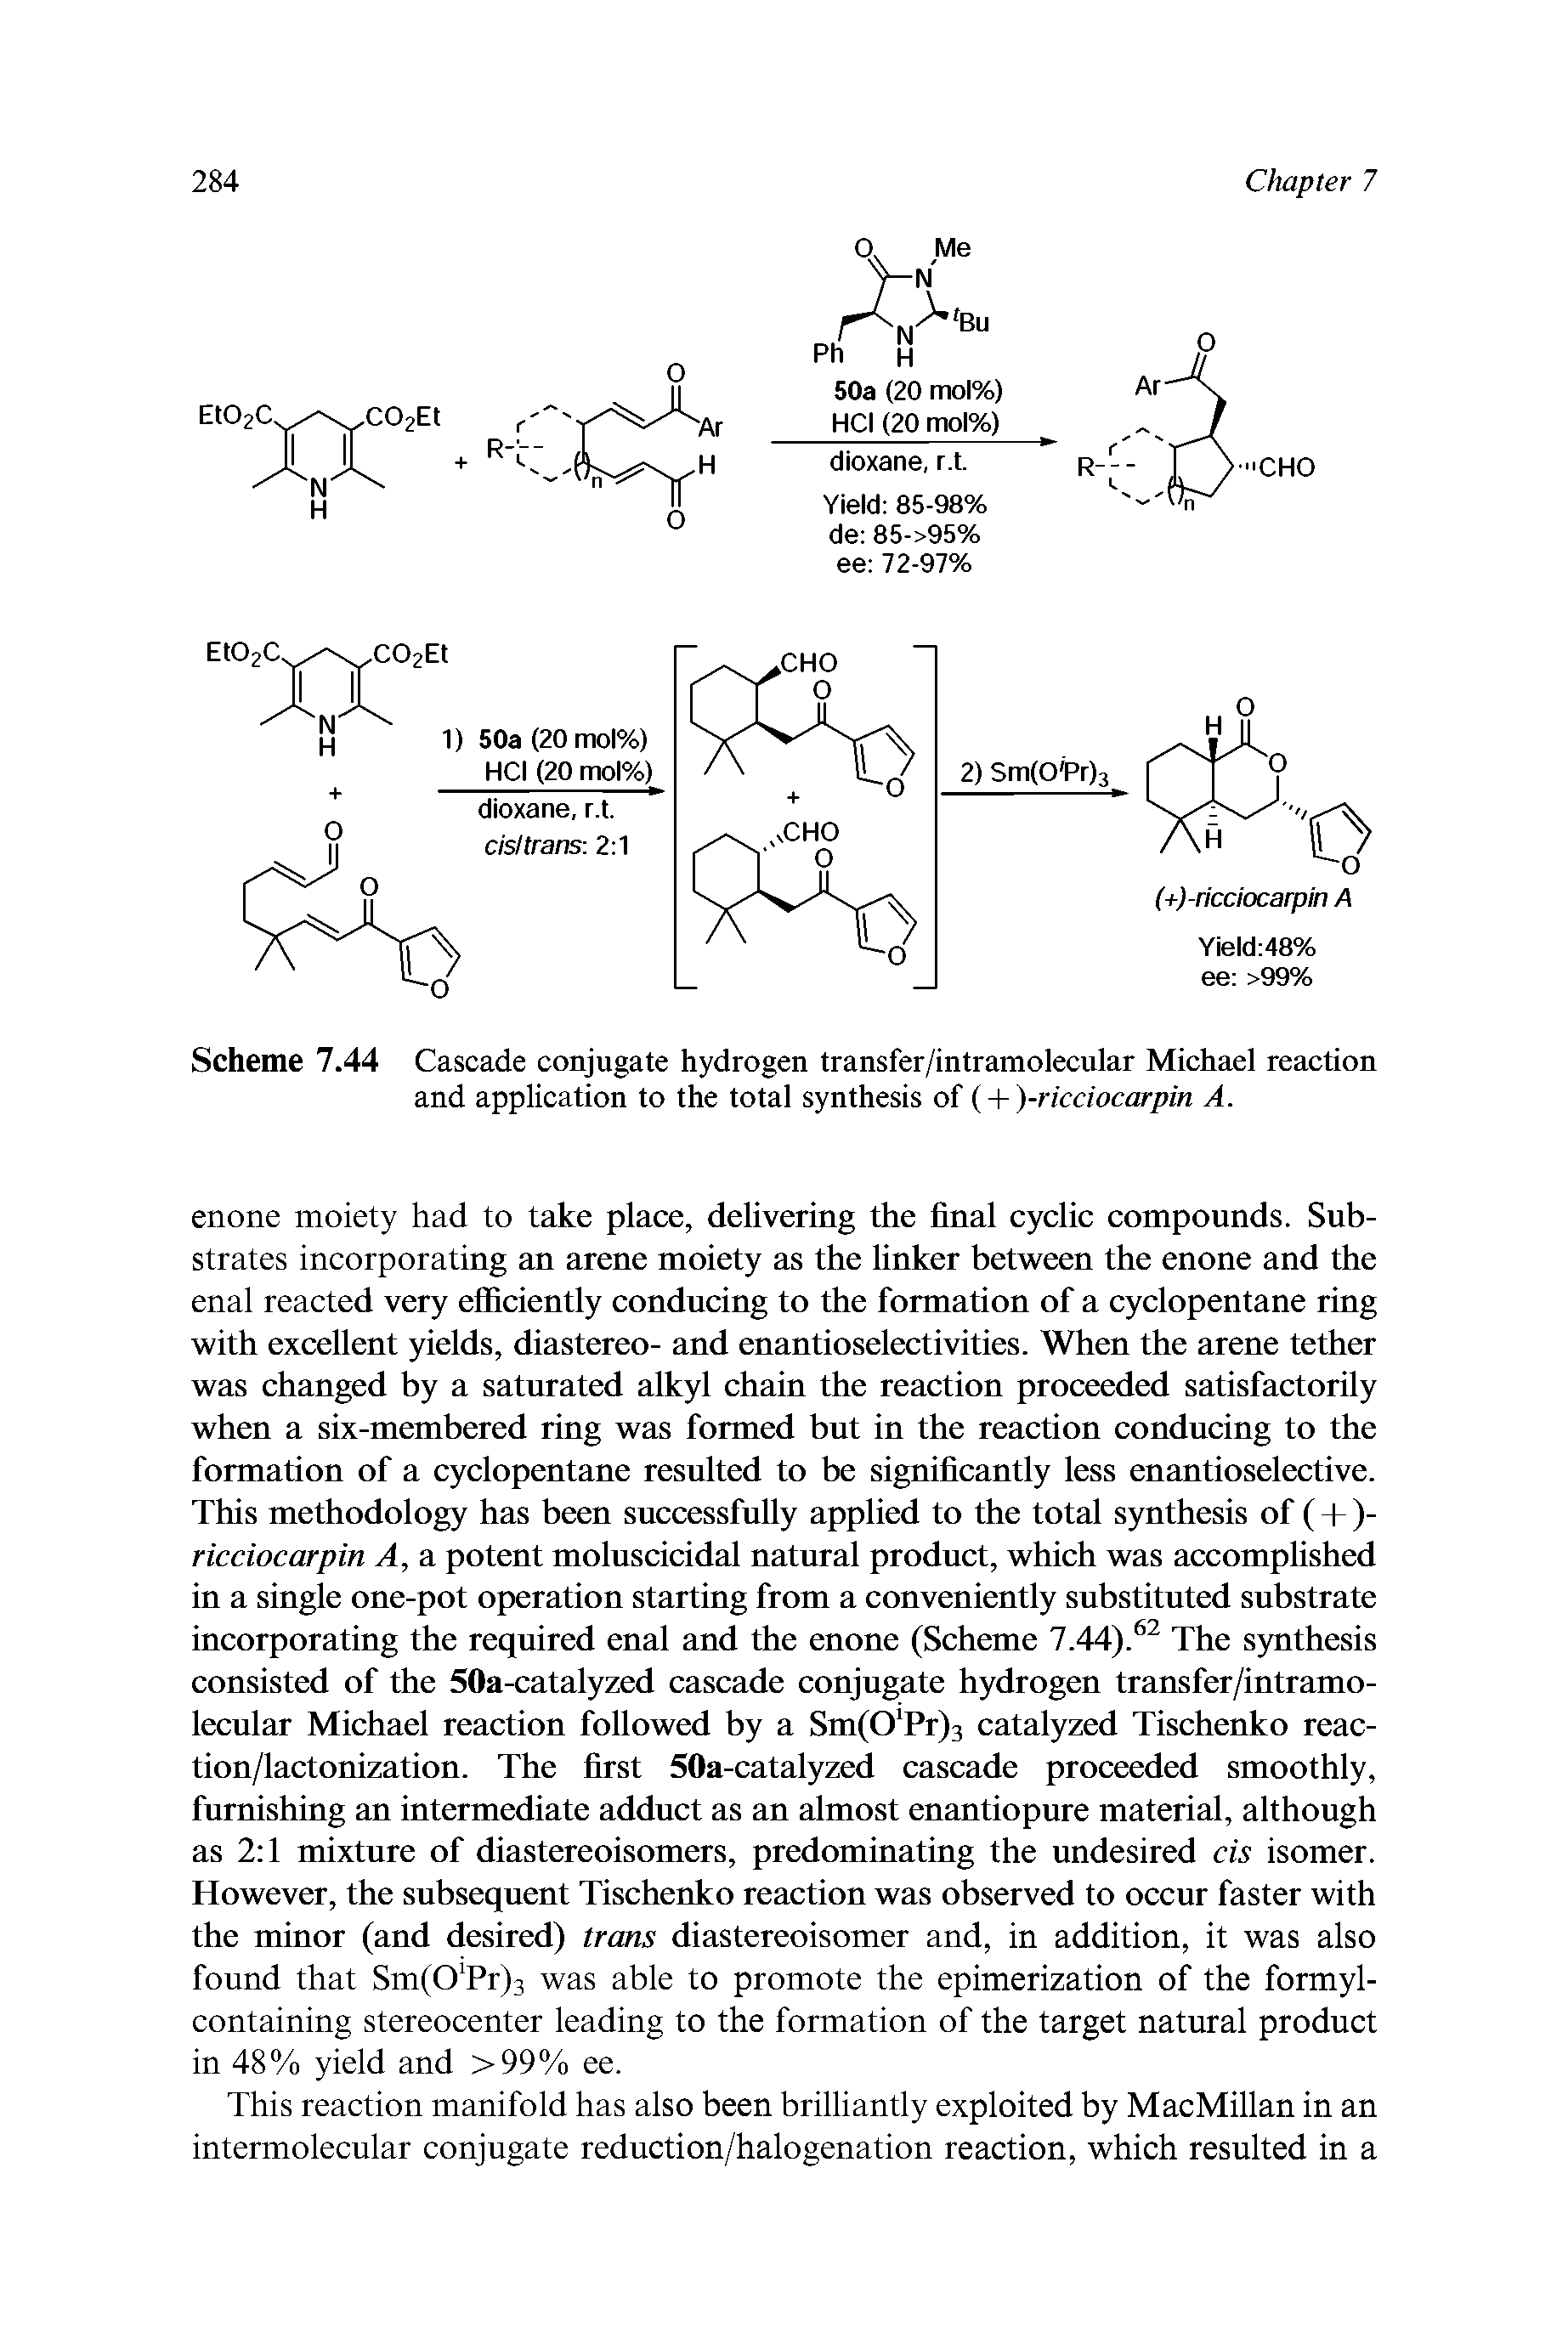 Scheme 7.44 Cascade conjugate hydrogen transfer/intramolecular Michael reaction and application to the total synthesis of (+ )-ricciocarpin A.